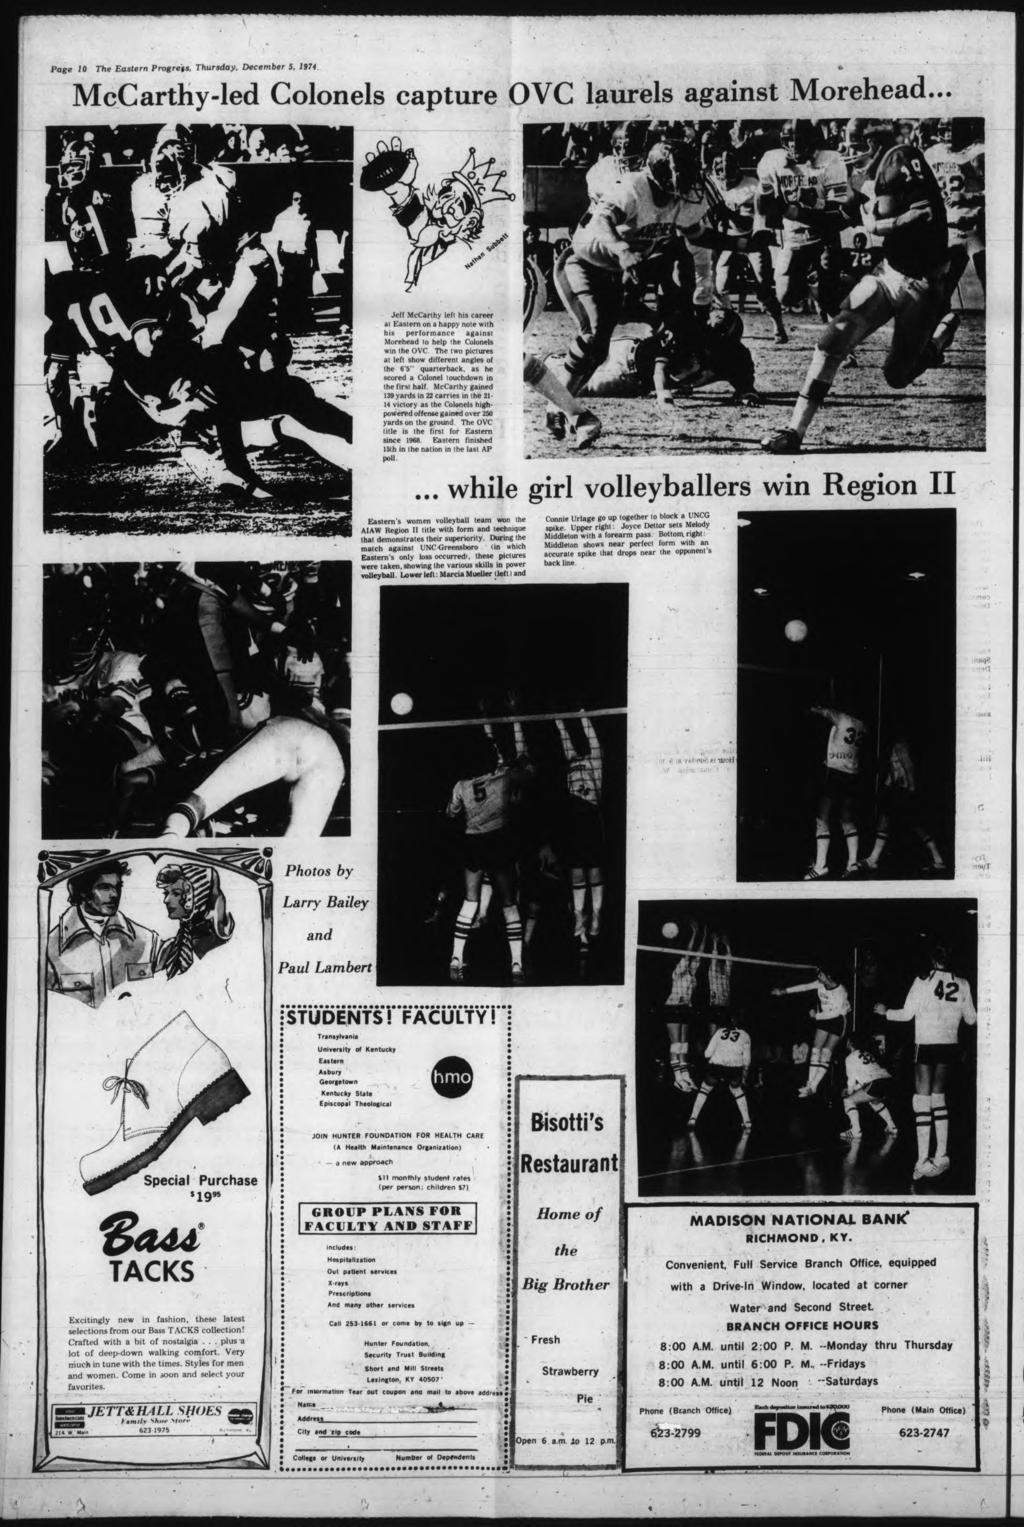 Page 10 The Eastern Progress, Thursday, December S. 1974 McCarthy-led Colonels capture OVC laurels aganst Morehead.